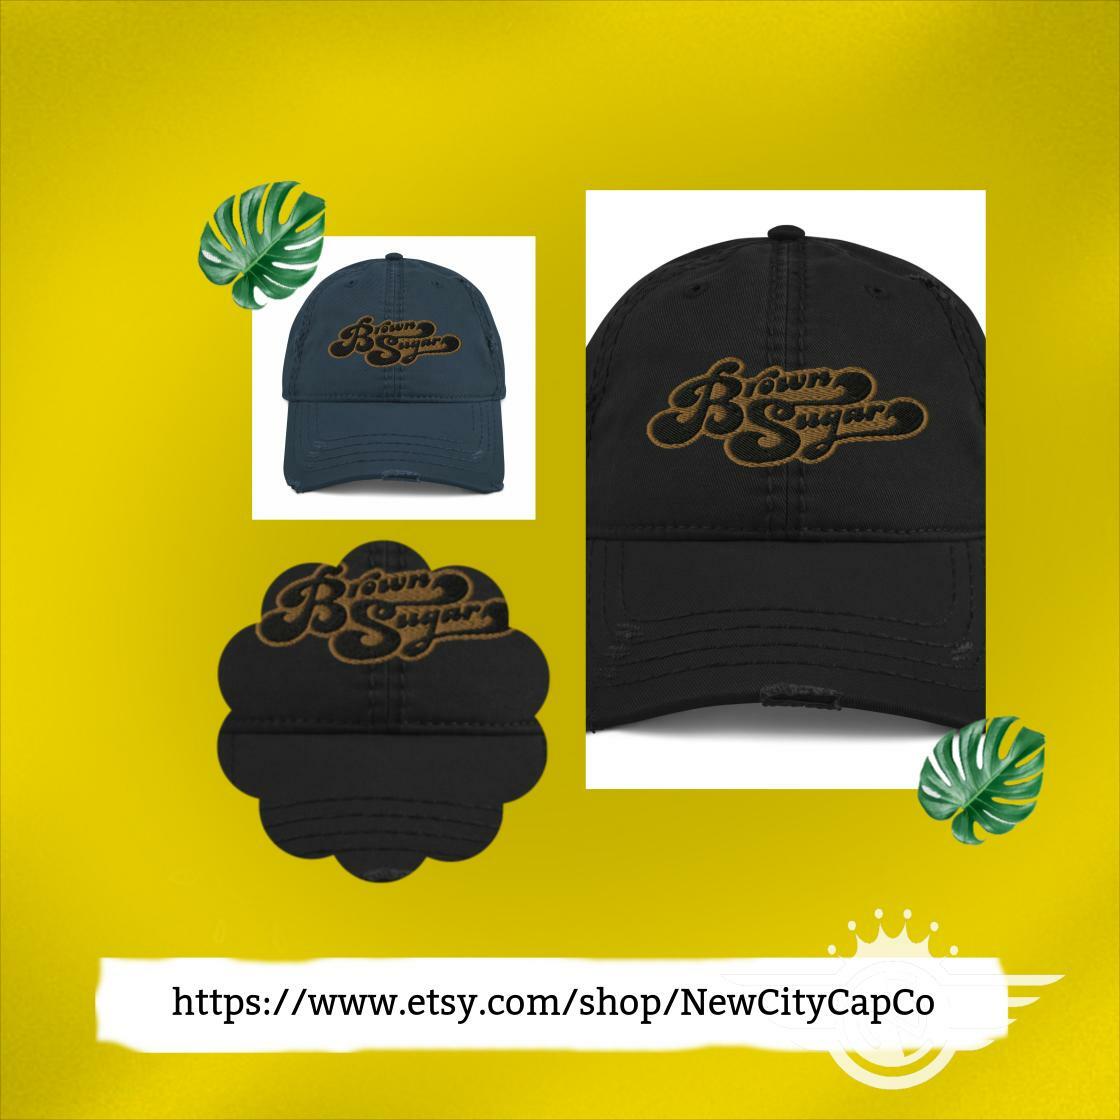 Limited offer! This awesome Brown Sugar Hat - Black Girl Magic - Black Beauty Hat - Black Woman Hat - Black Women Art - African American Women Clothing - African Art for $24.5.. 
etsy.com/listing/130013…
#BlackWomanSvg #AfricanAmerican